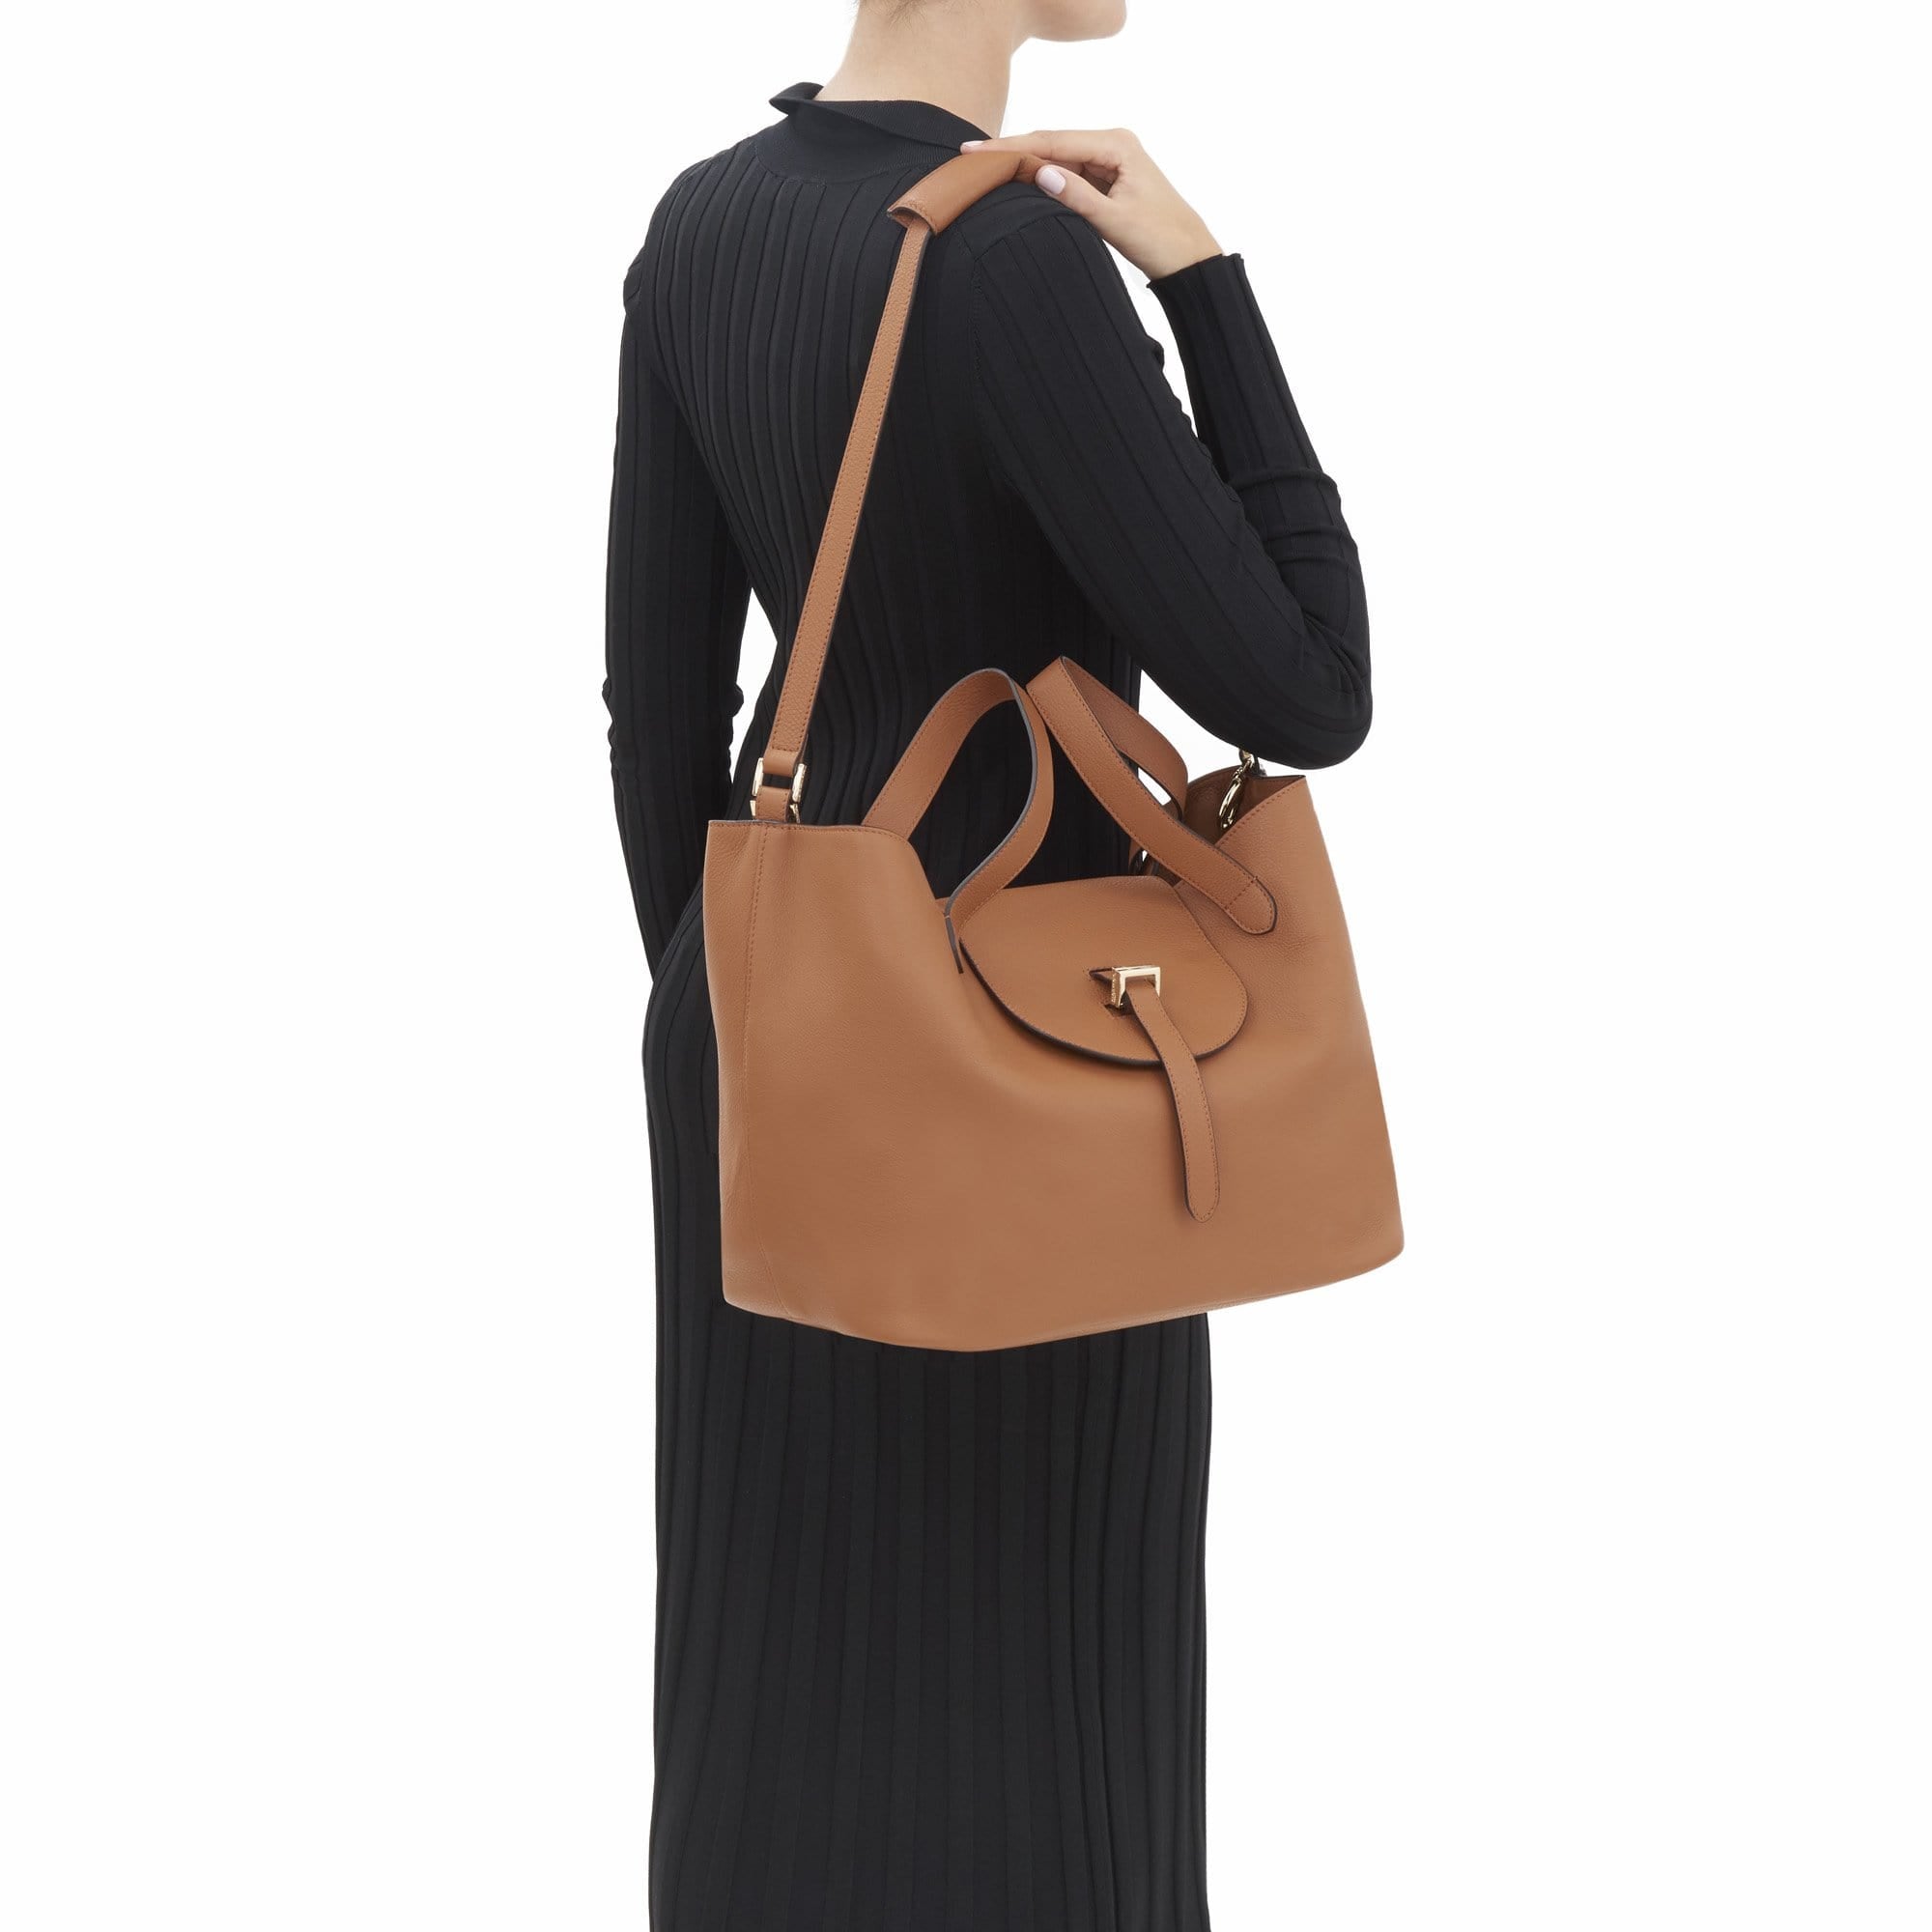 Thela Tan Brown Leather Tote Bag for Women | meli melo Official